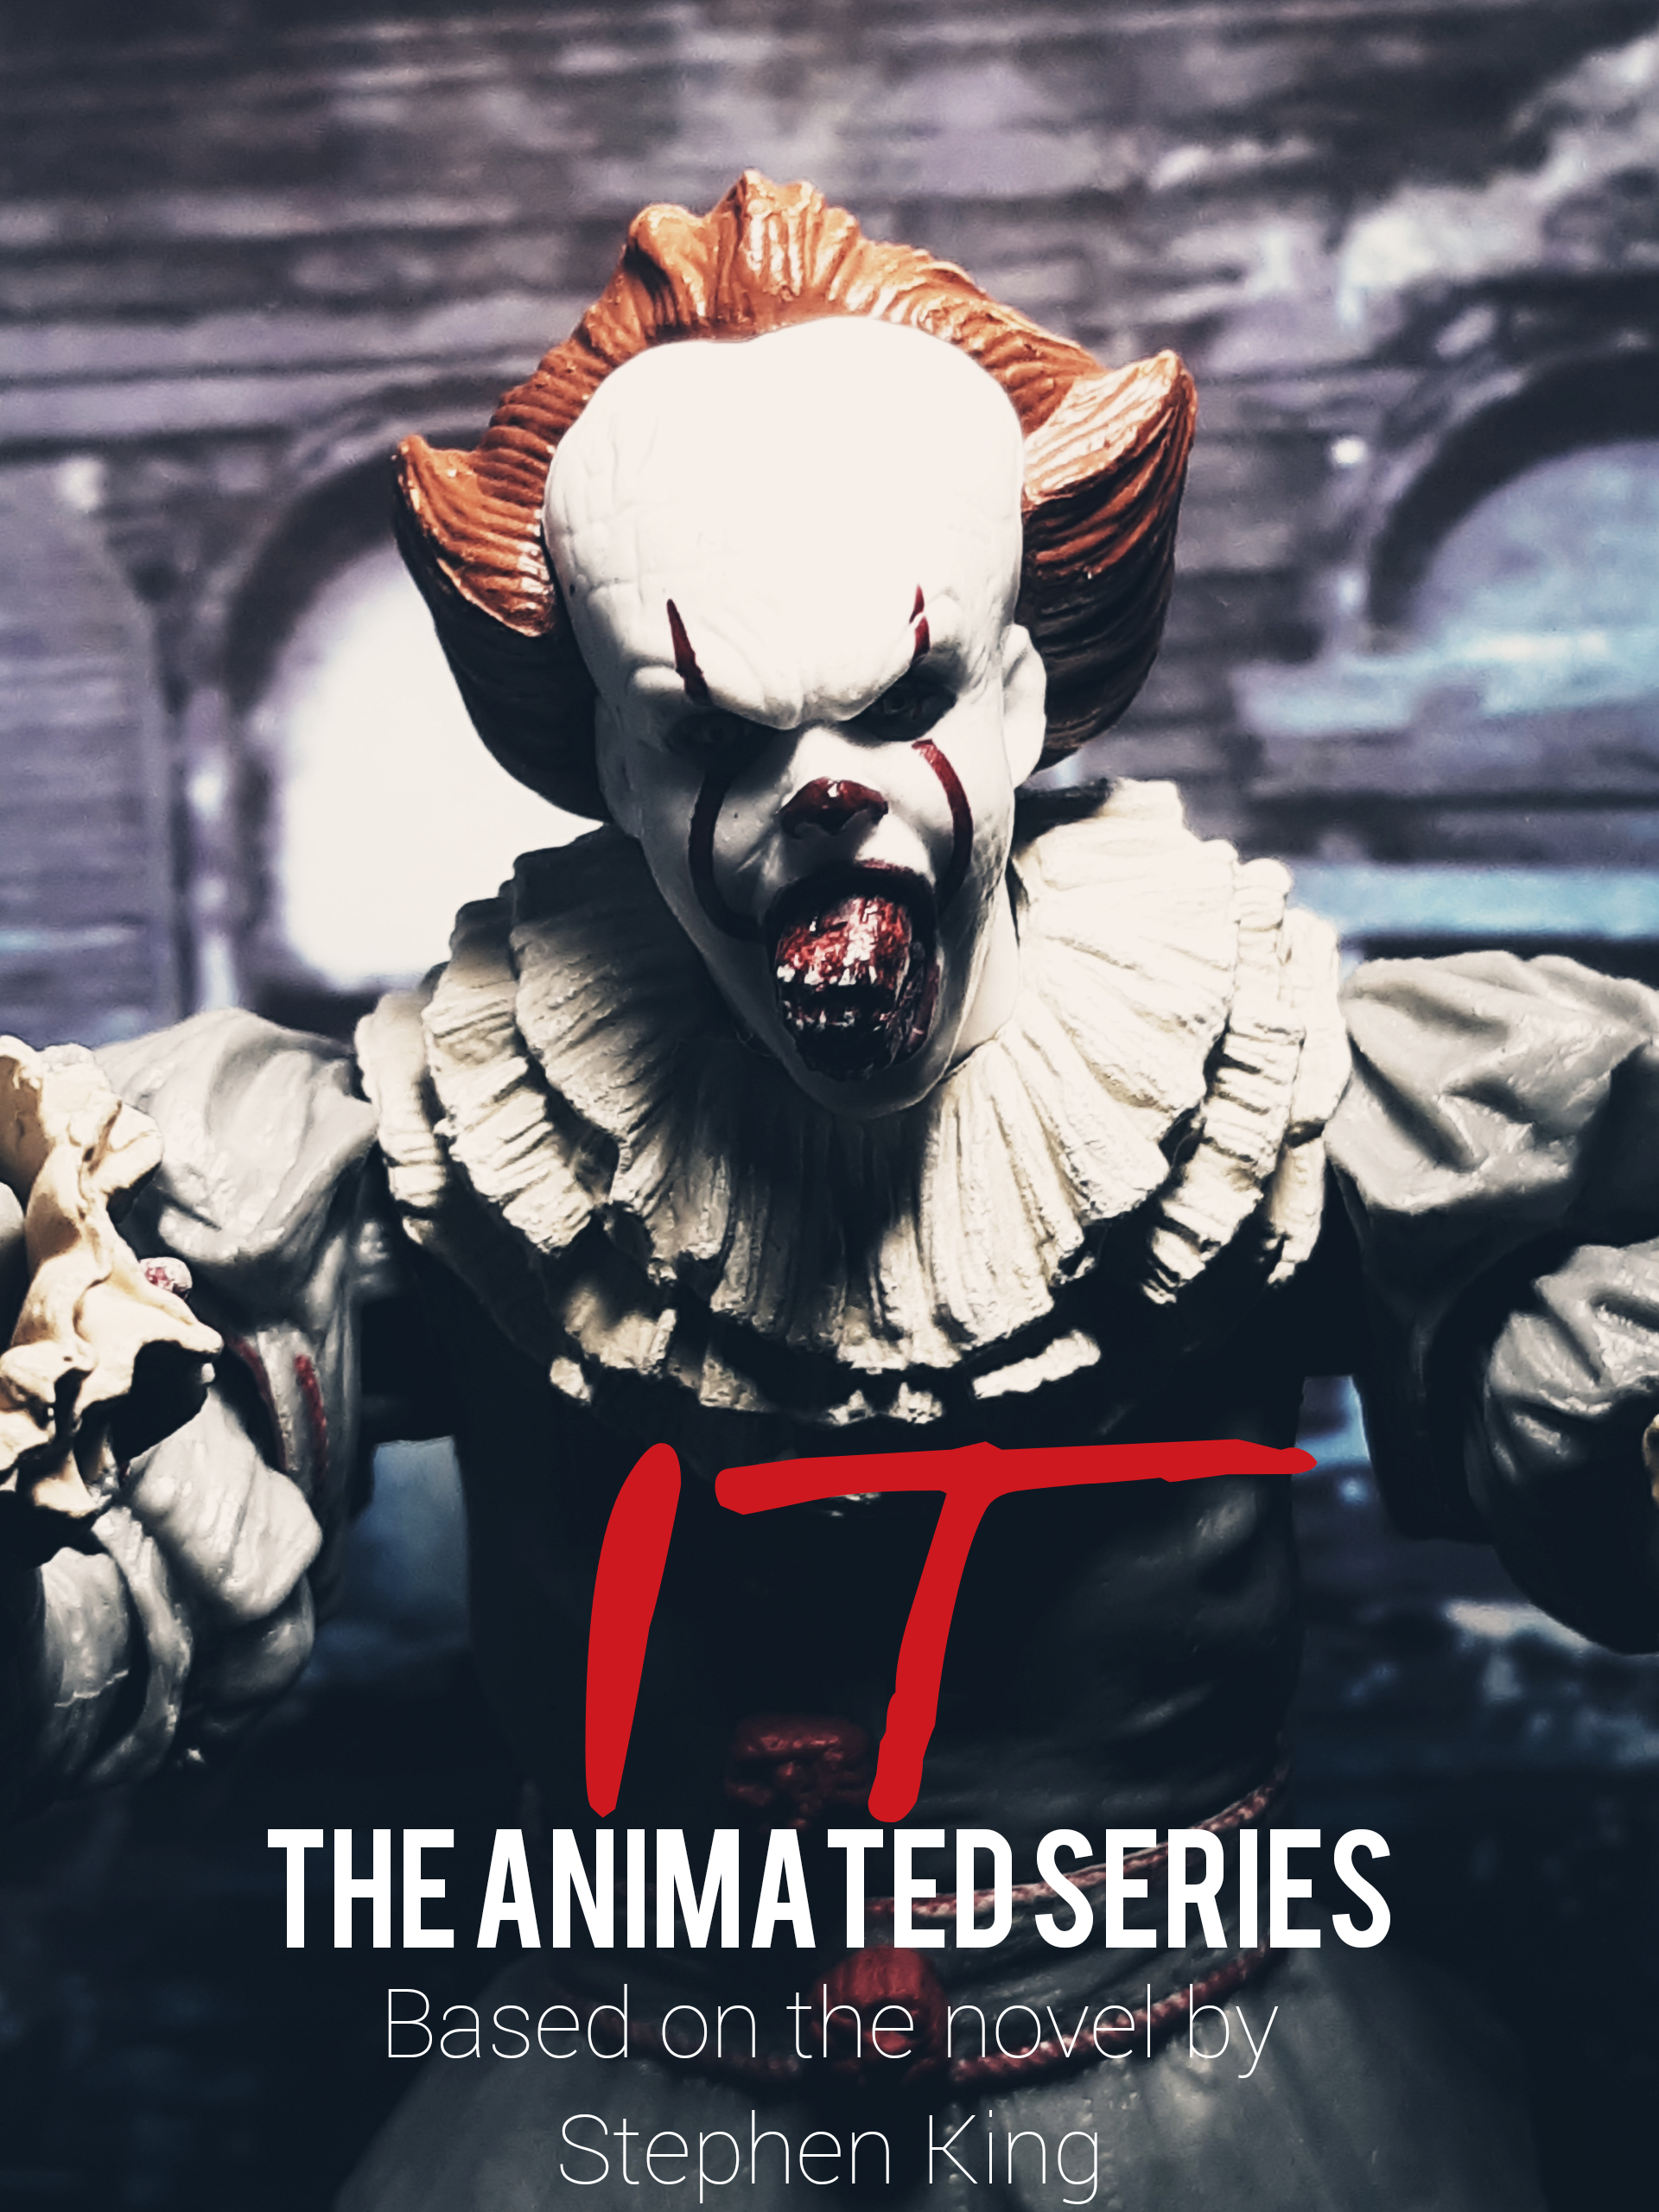 It: The Animated Series